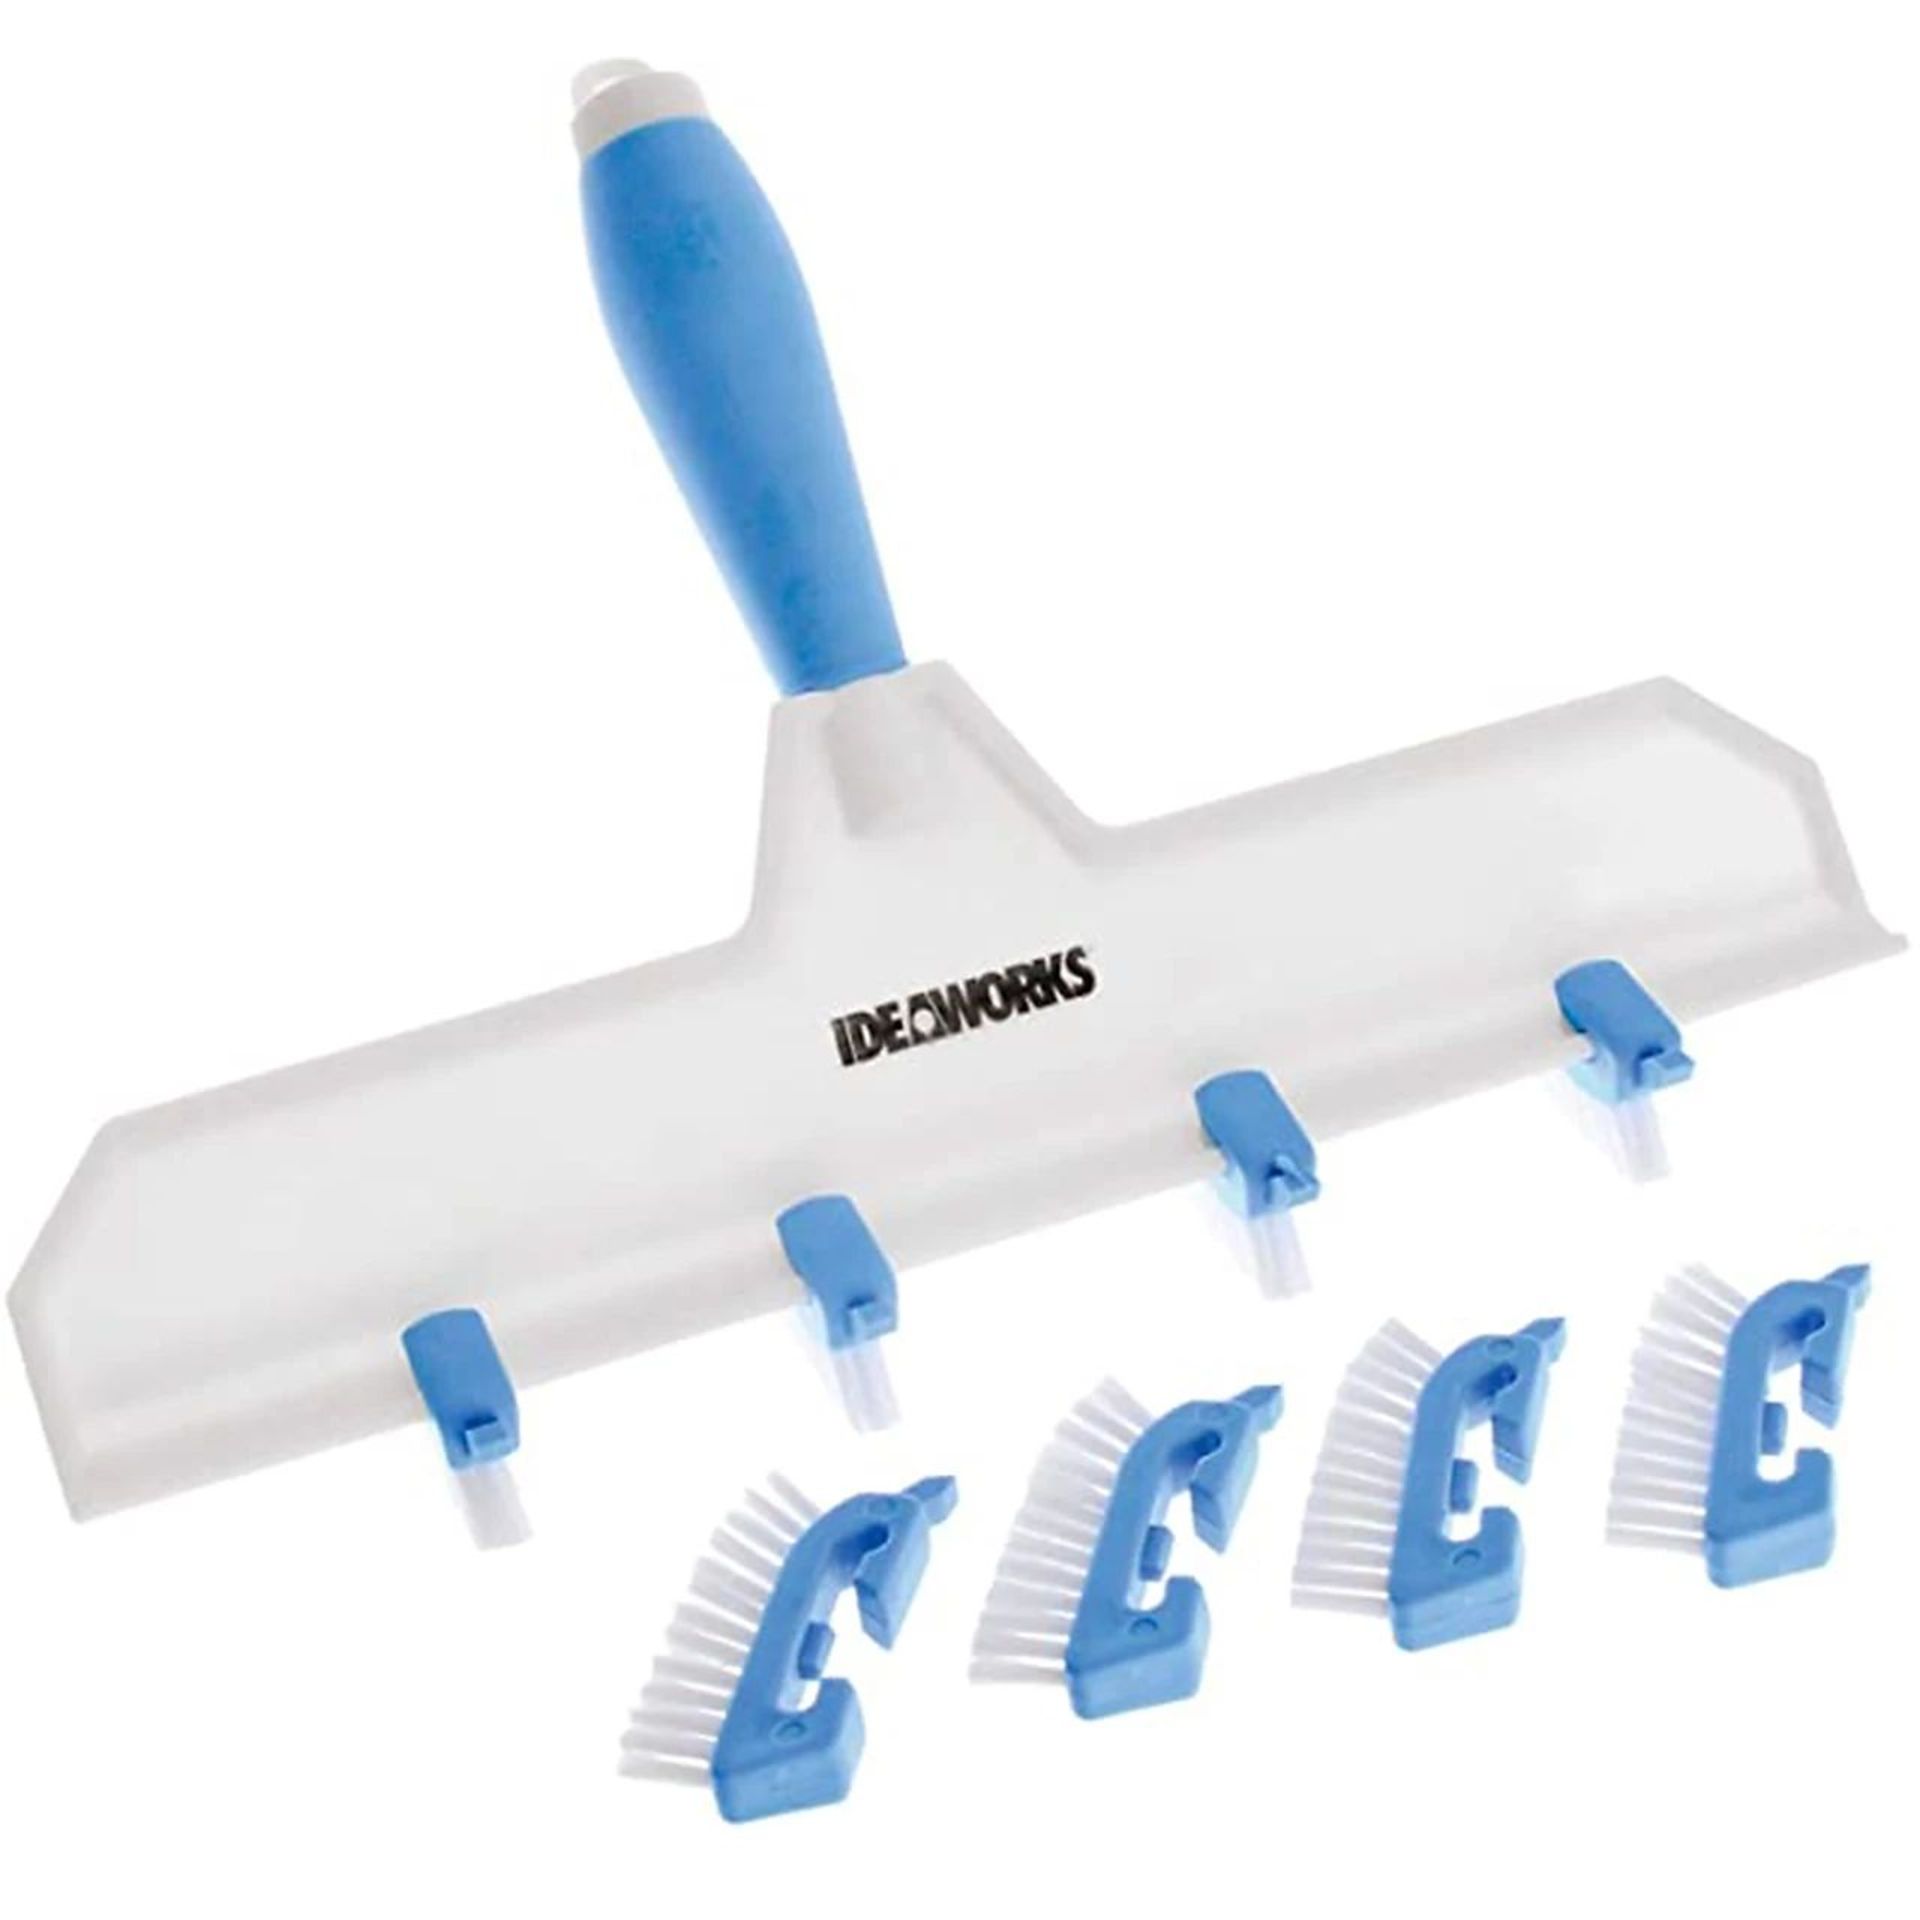 20 X BRAND NEW ADJUSTABLE HANDHELD GROUT CLEANING TOOLWITH SOFT GRIP HANDLE AND 8 MINI BRUSH HEADS - Image 3 of 3